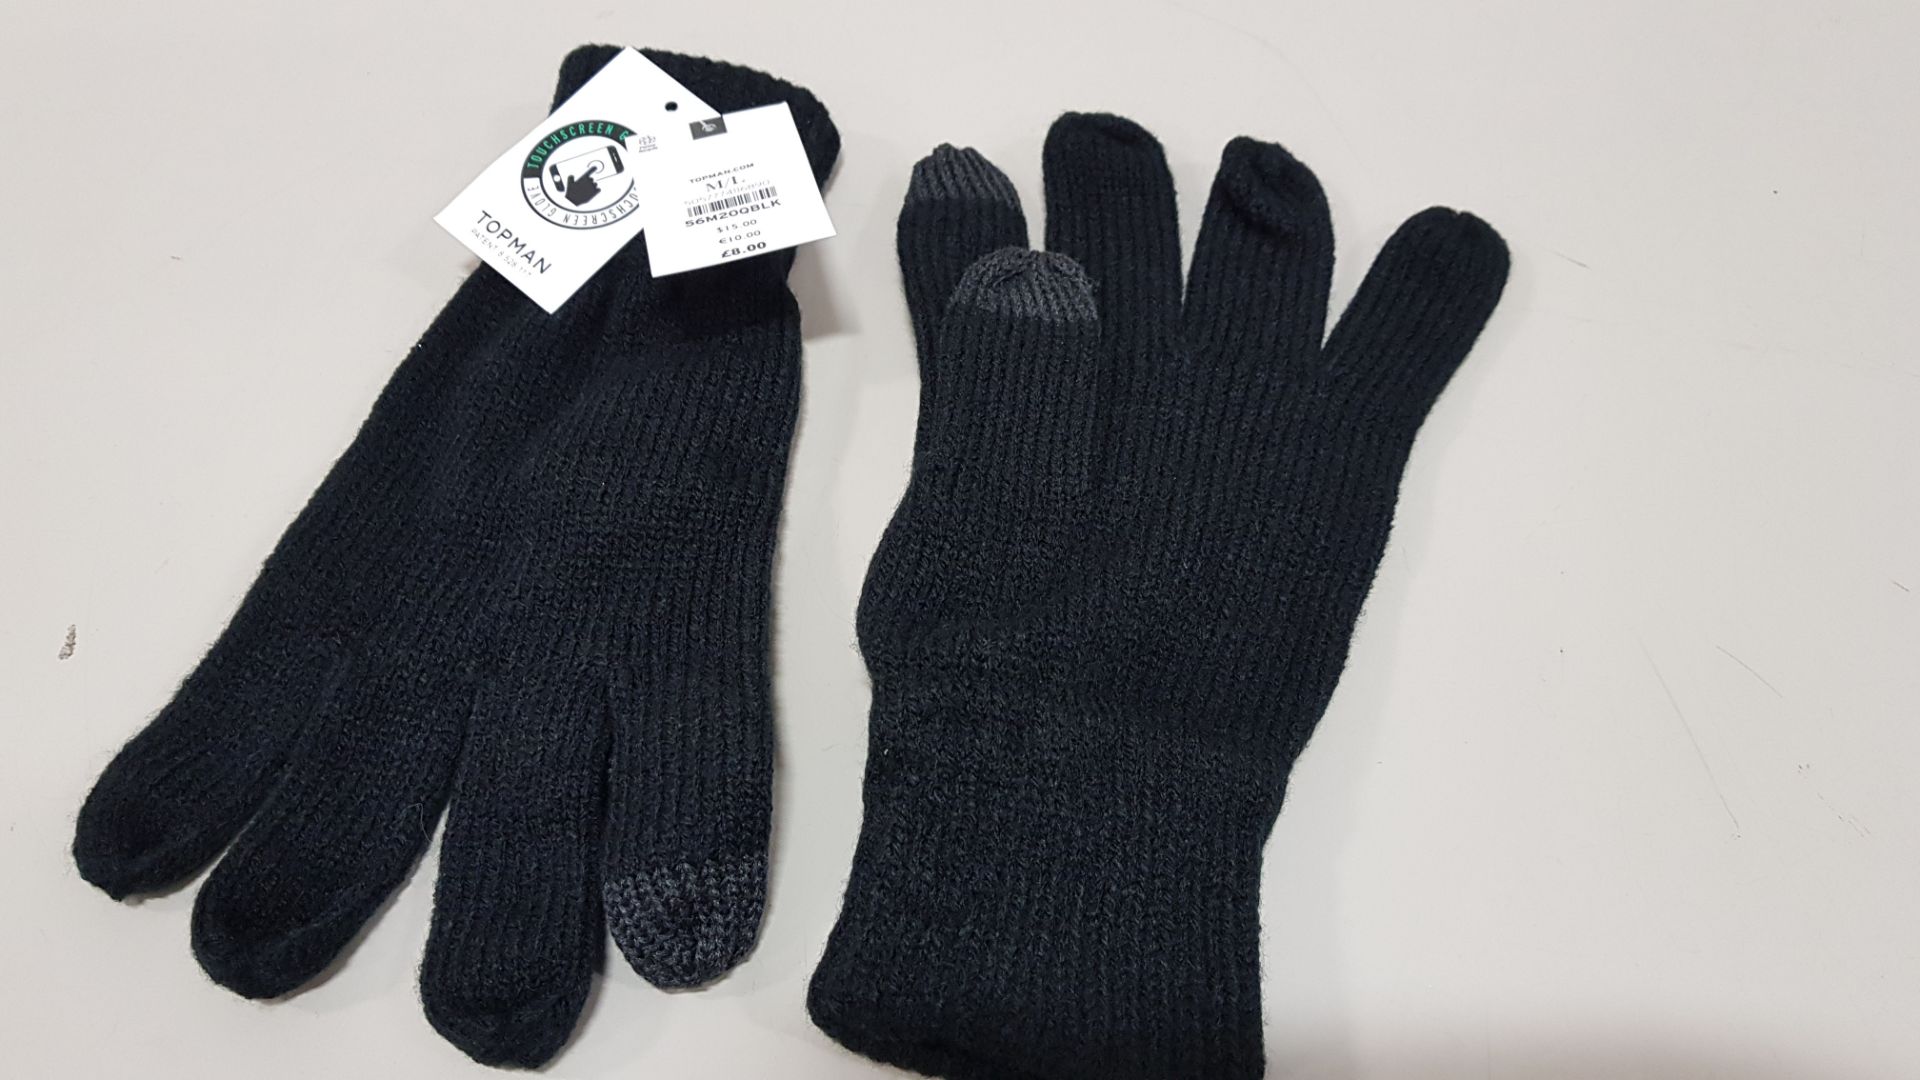 60 X BRAND NEW TOPMAN BLACK WINTER GLOVES SIZE M/L TOTAL RRP £480.00 (PICK LOOSE - DOUBLE PACKS)